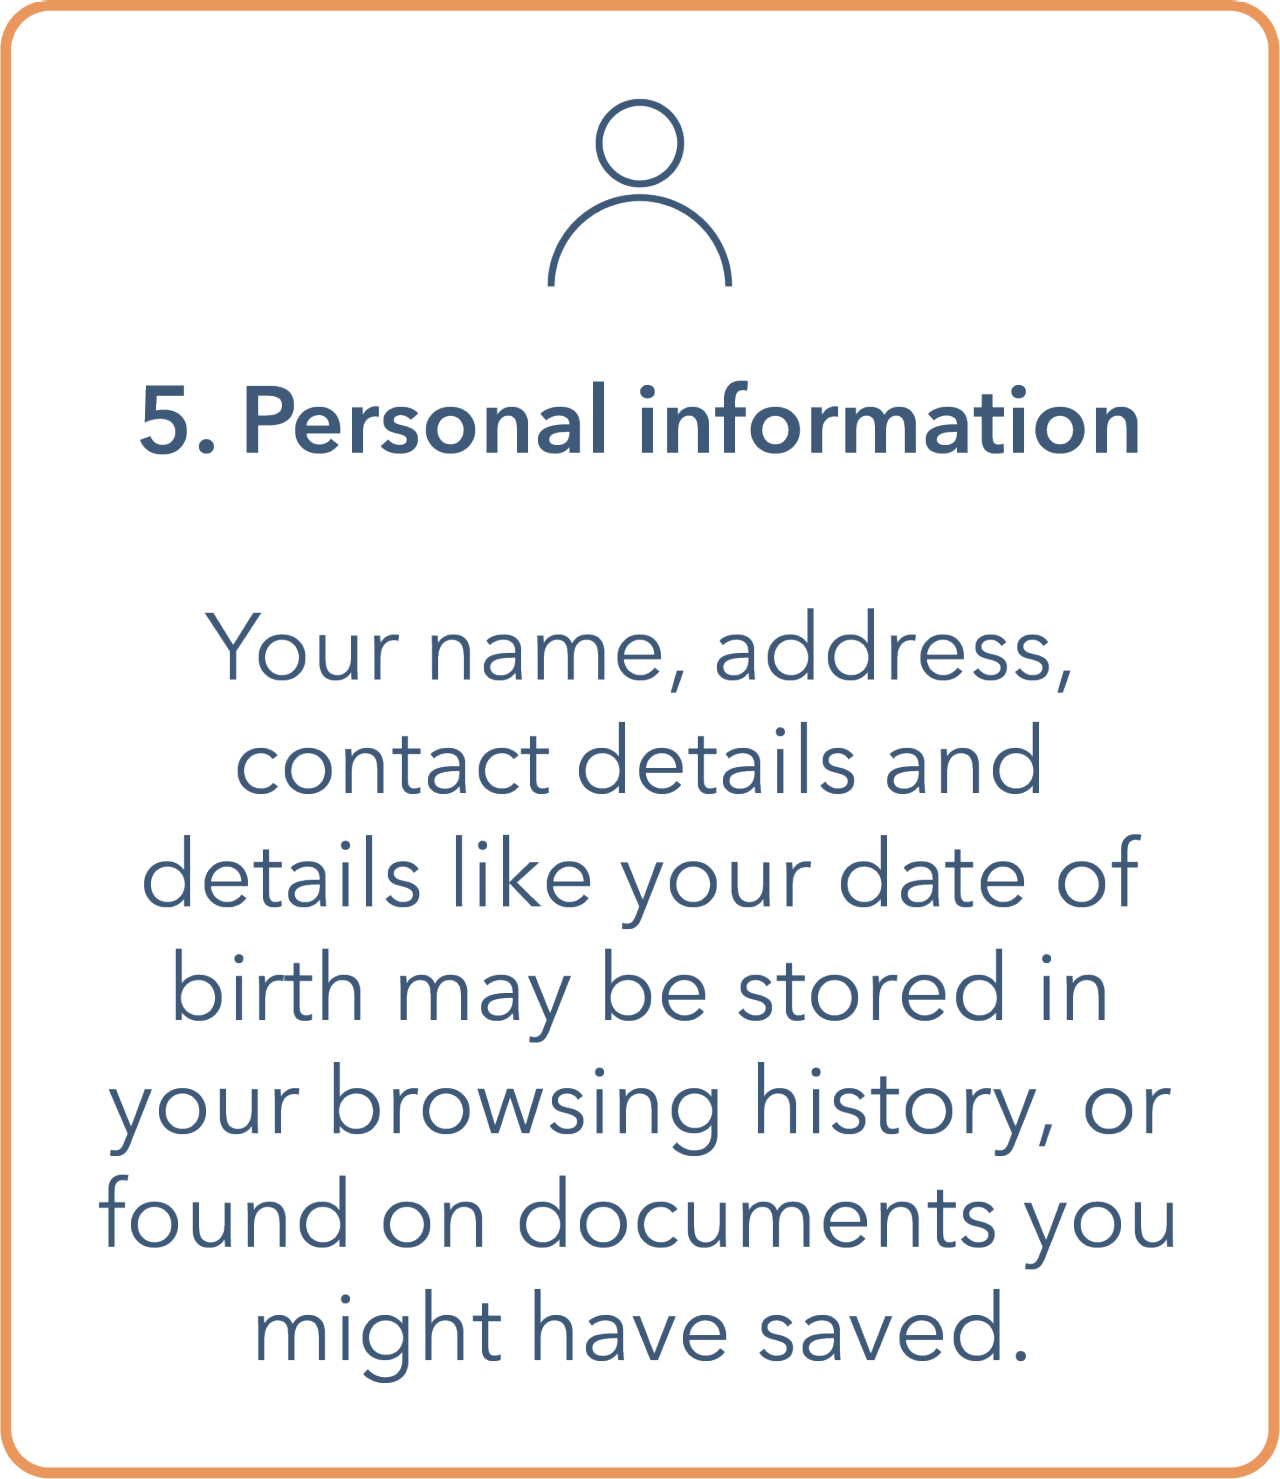 Image shows a tile with an icon of a person at the top. Underneath is a bullet point containing '5. Personal information'. The main body contains 'your name, address, contact details and details like your date of birth may be stored in your browsing history, or found on documents you might have saved.' Tile has an orange outline border and text is in dark blue.